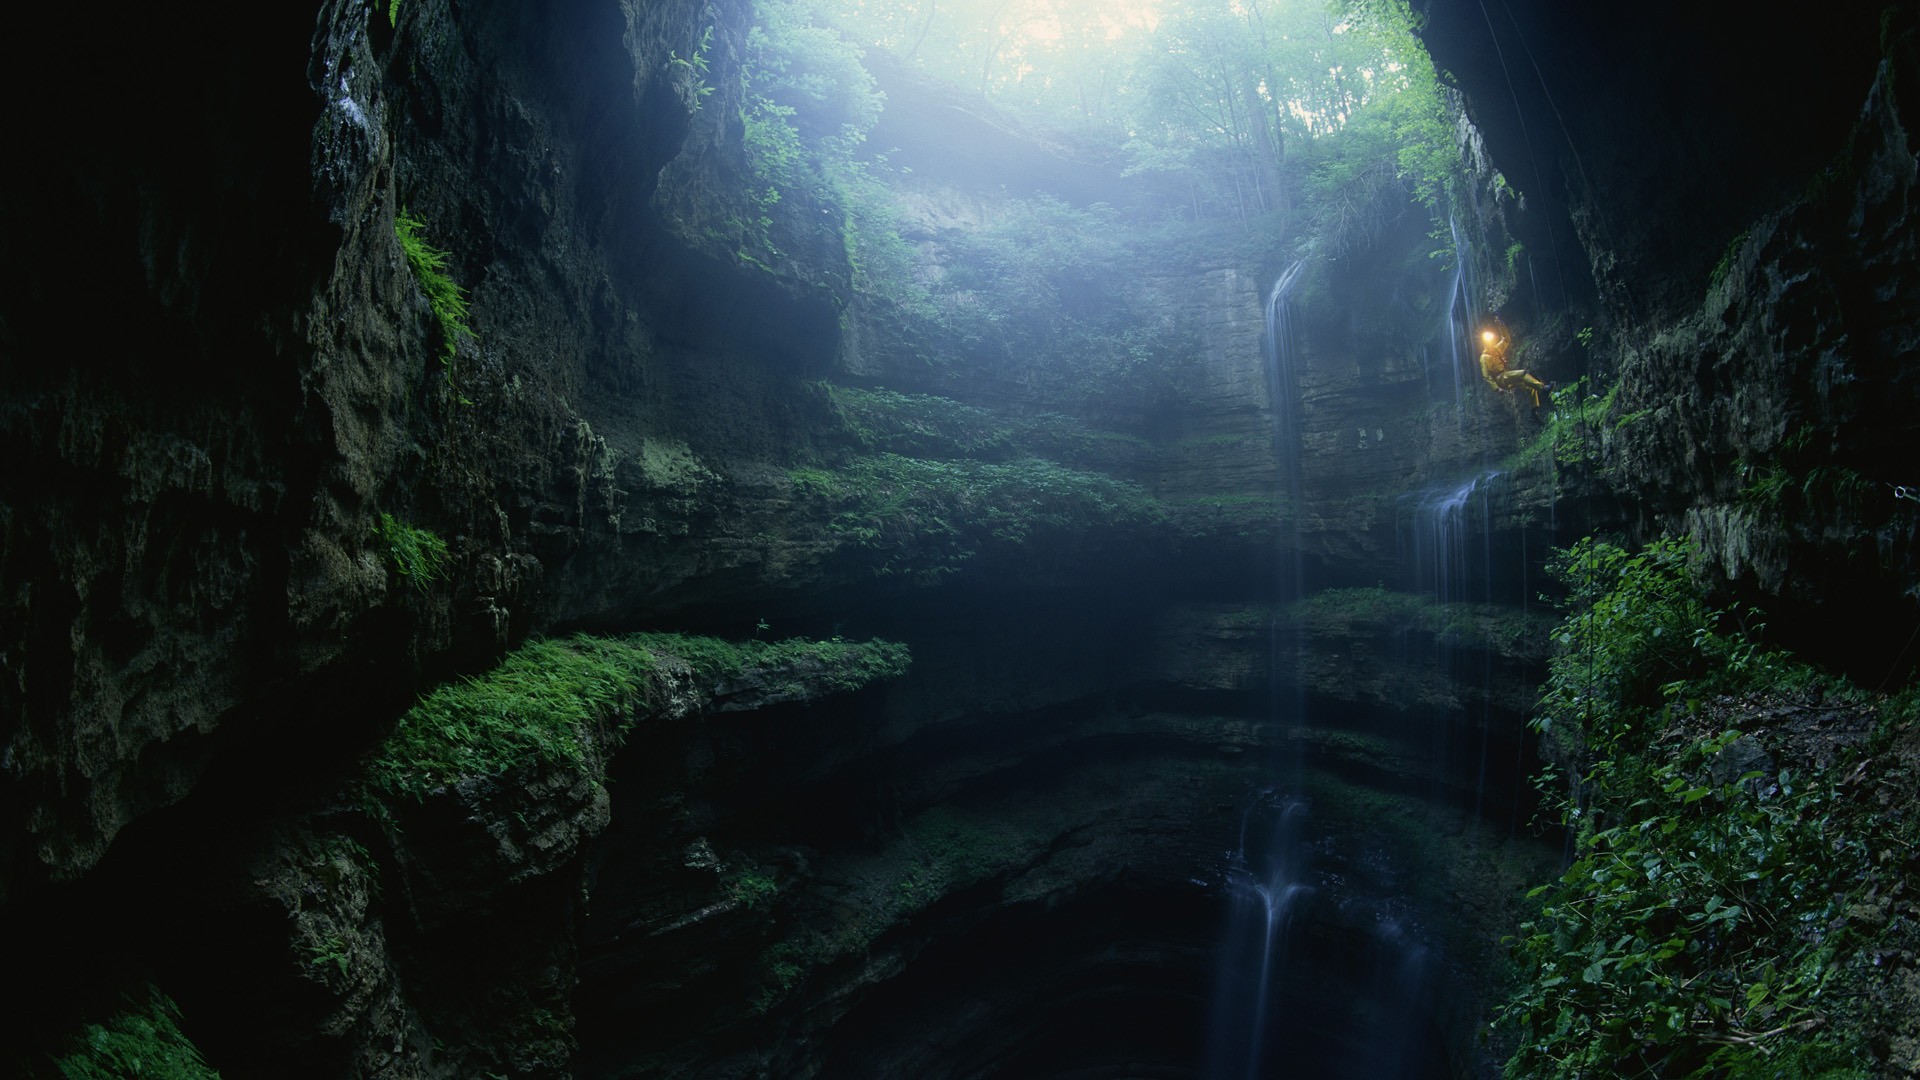 Wallpapers PC HD - Wallpaper Cave